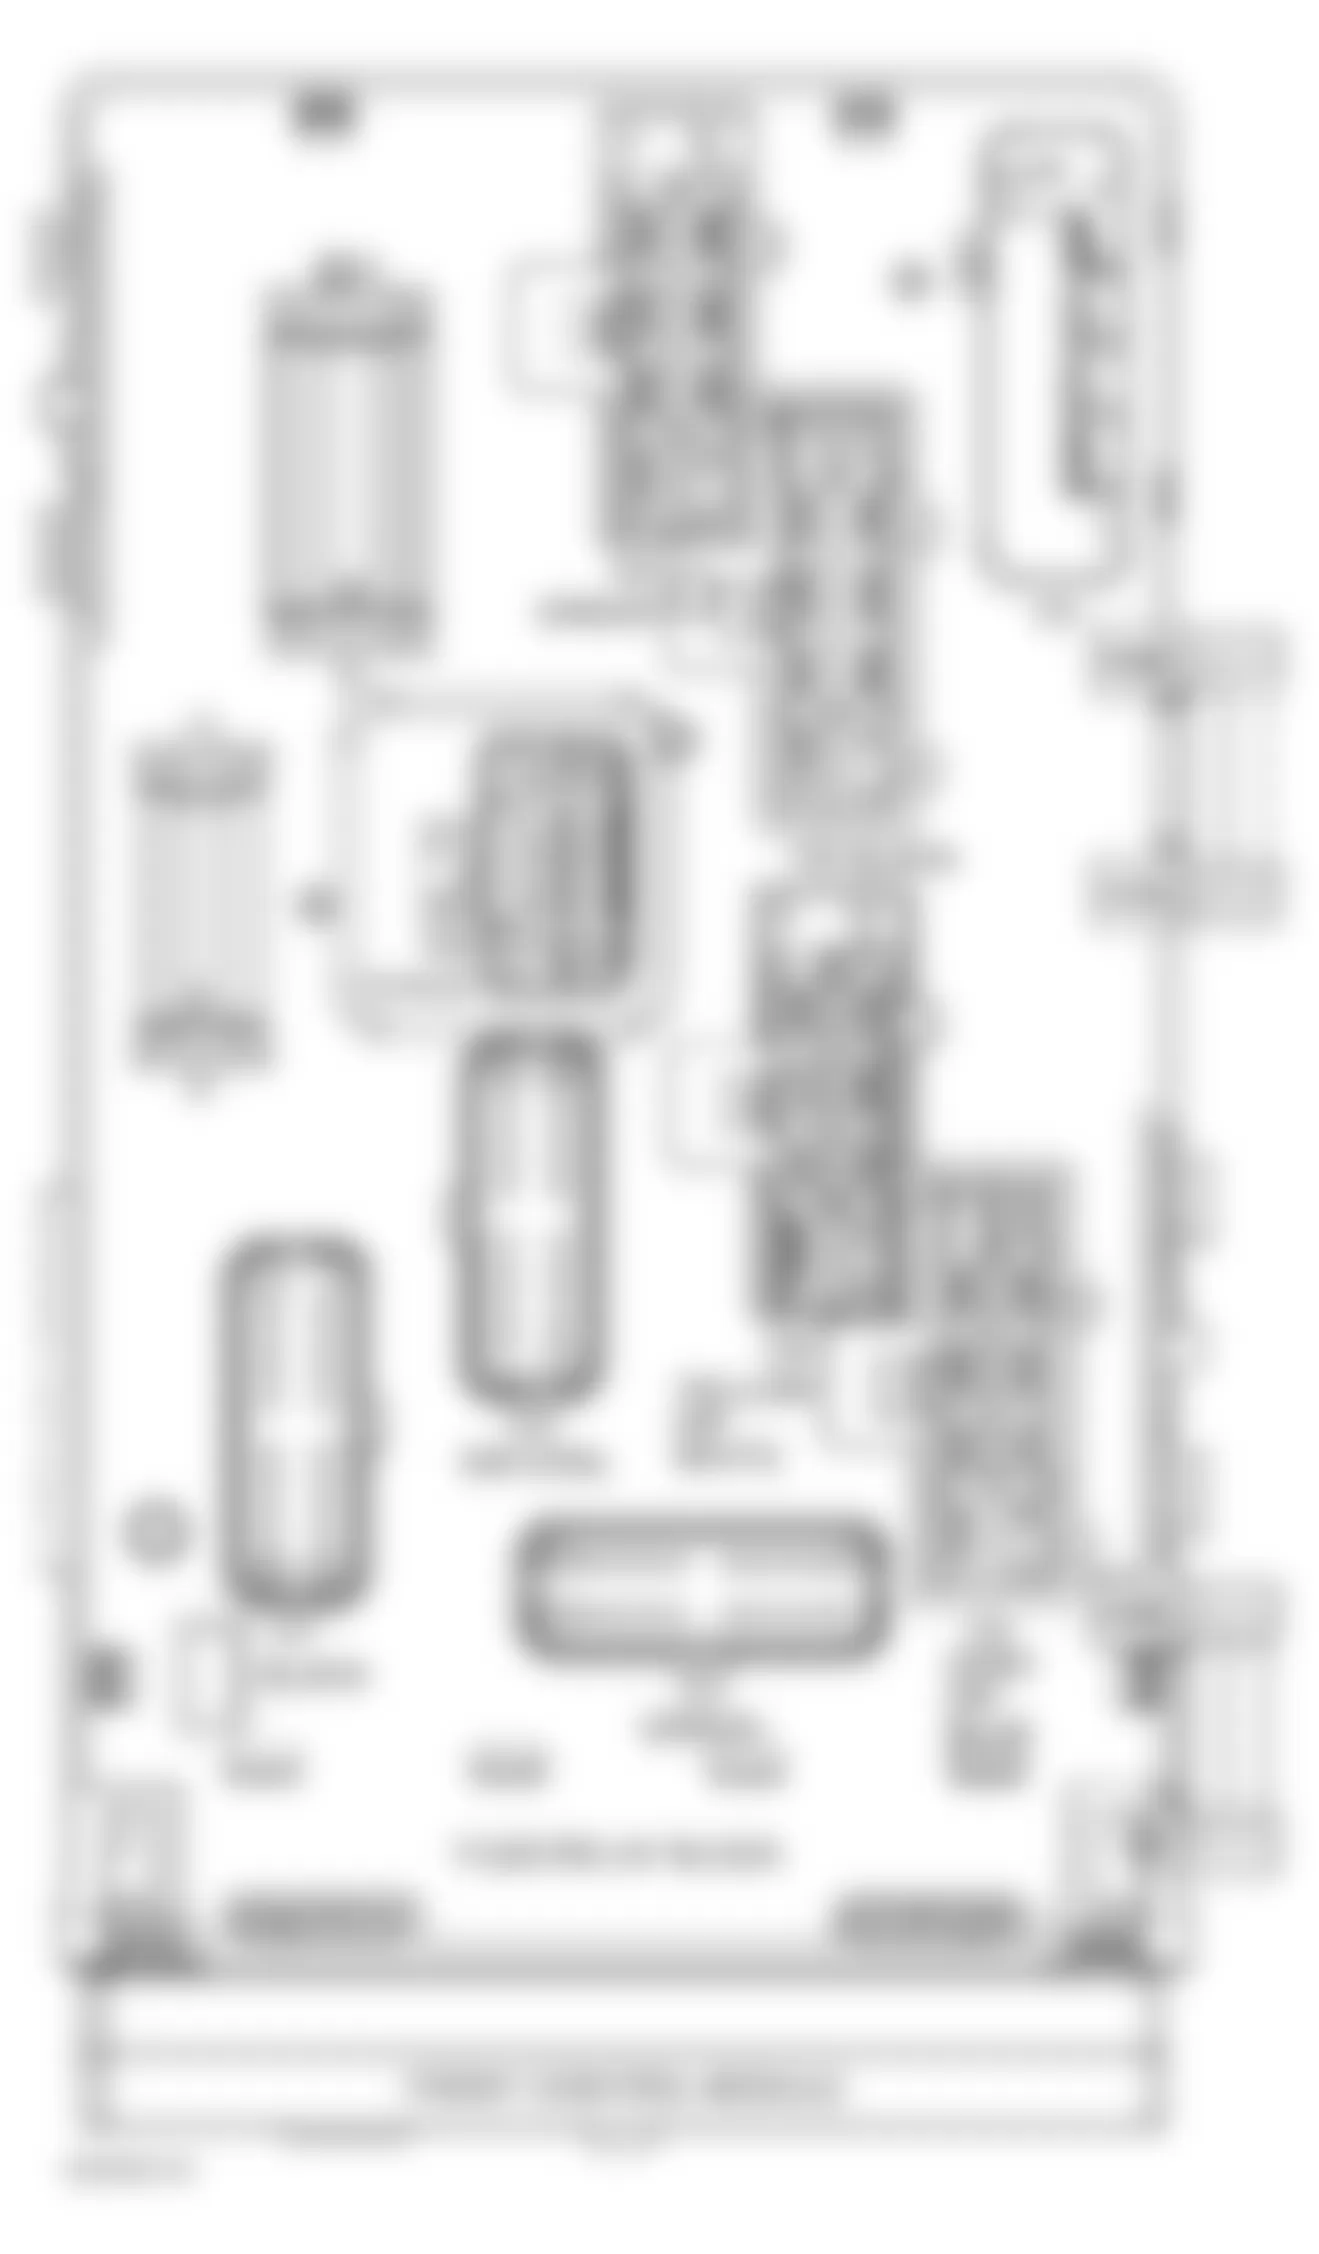 Chrysler Town & Country Limited 2001 - Component Locations -  Identifying Fuse & Relay Center (2 Of 2)